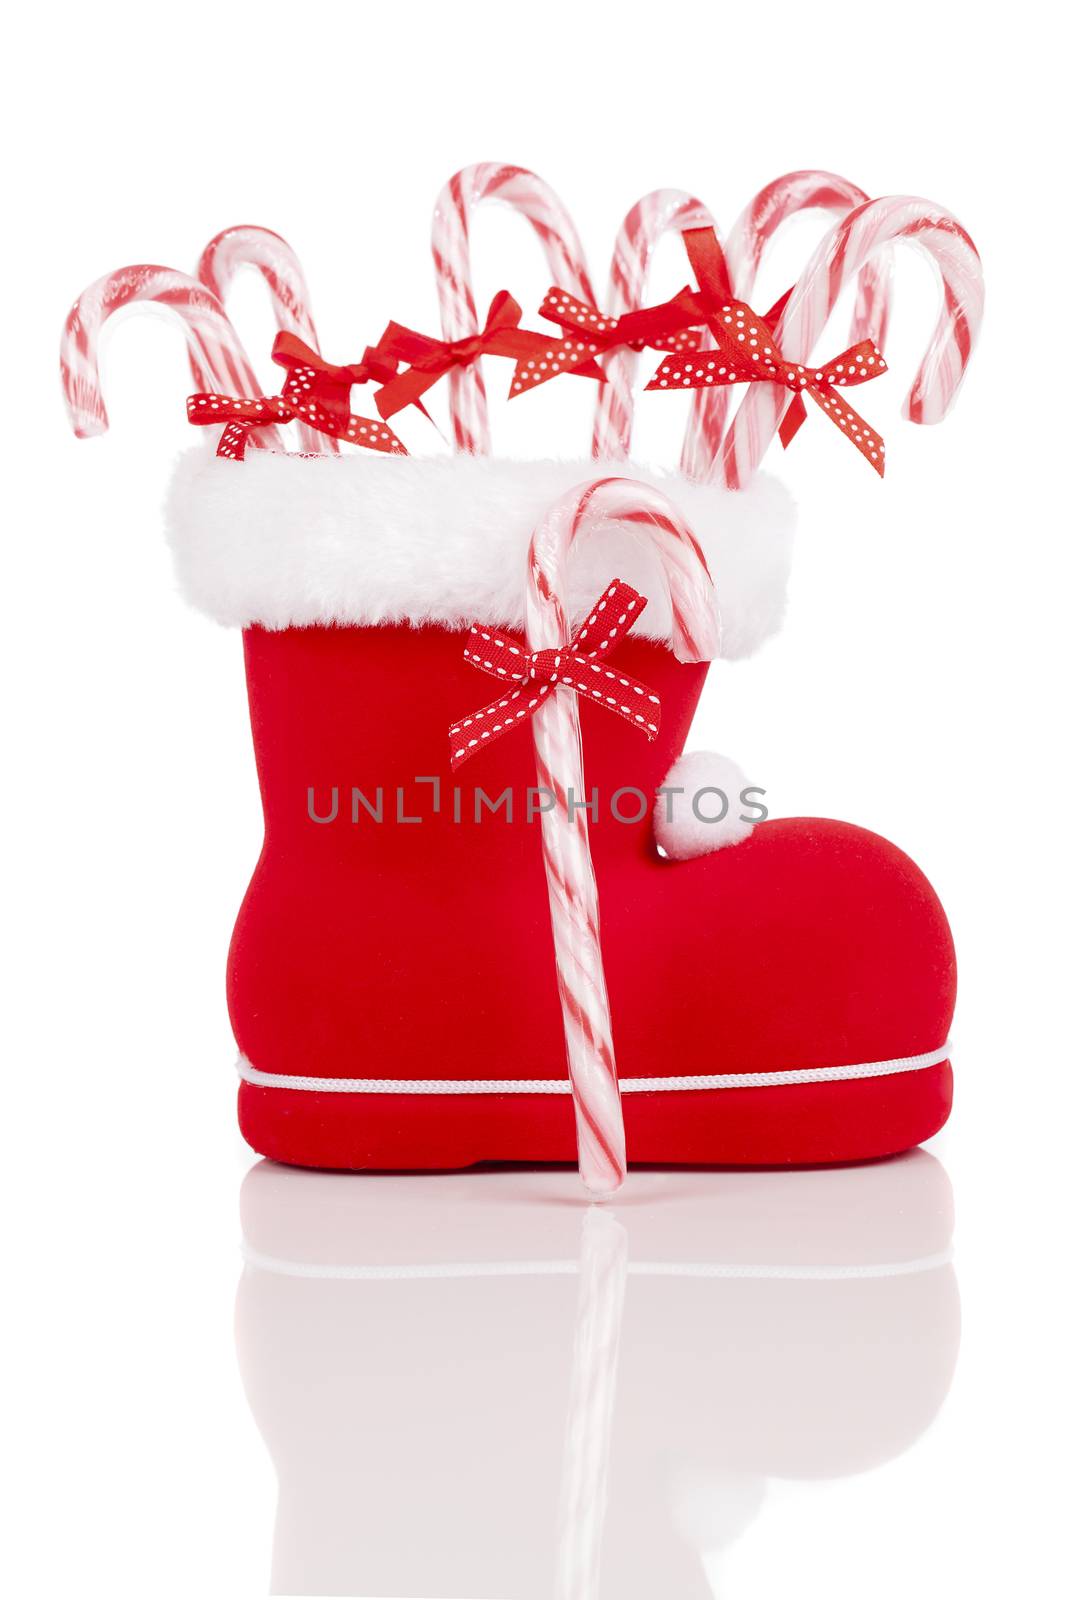 Santa's boot with candy canes on white background  by motorolka